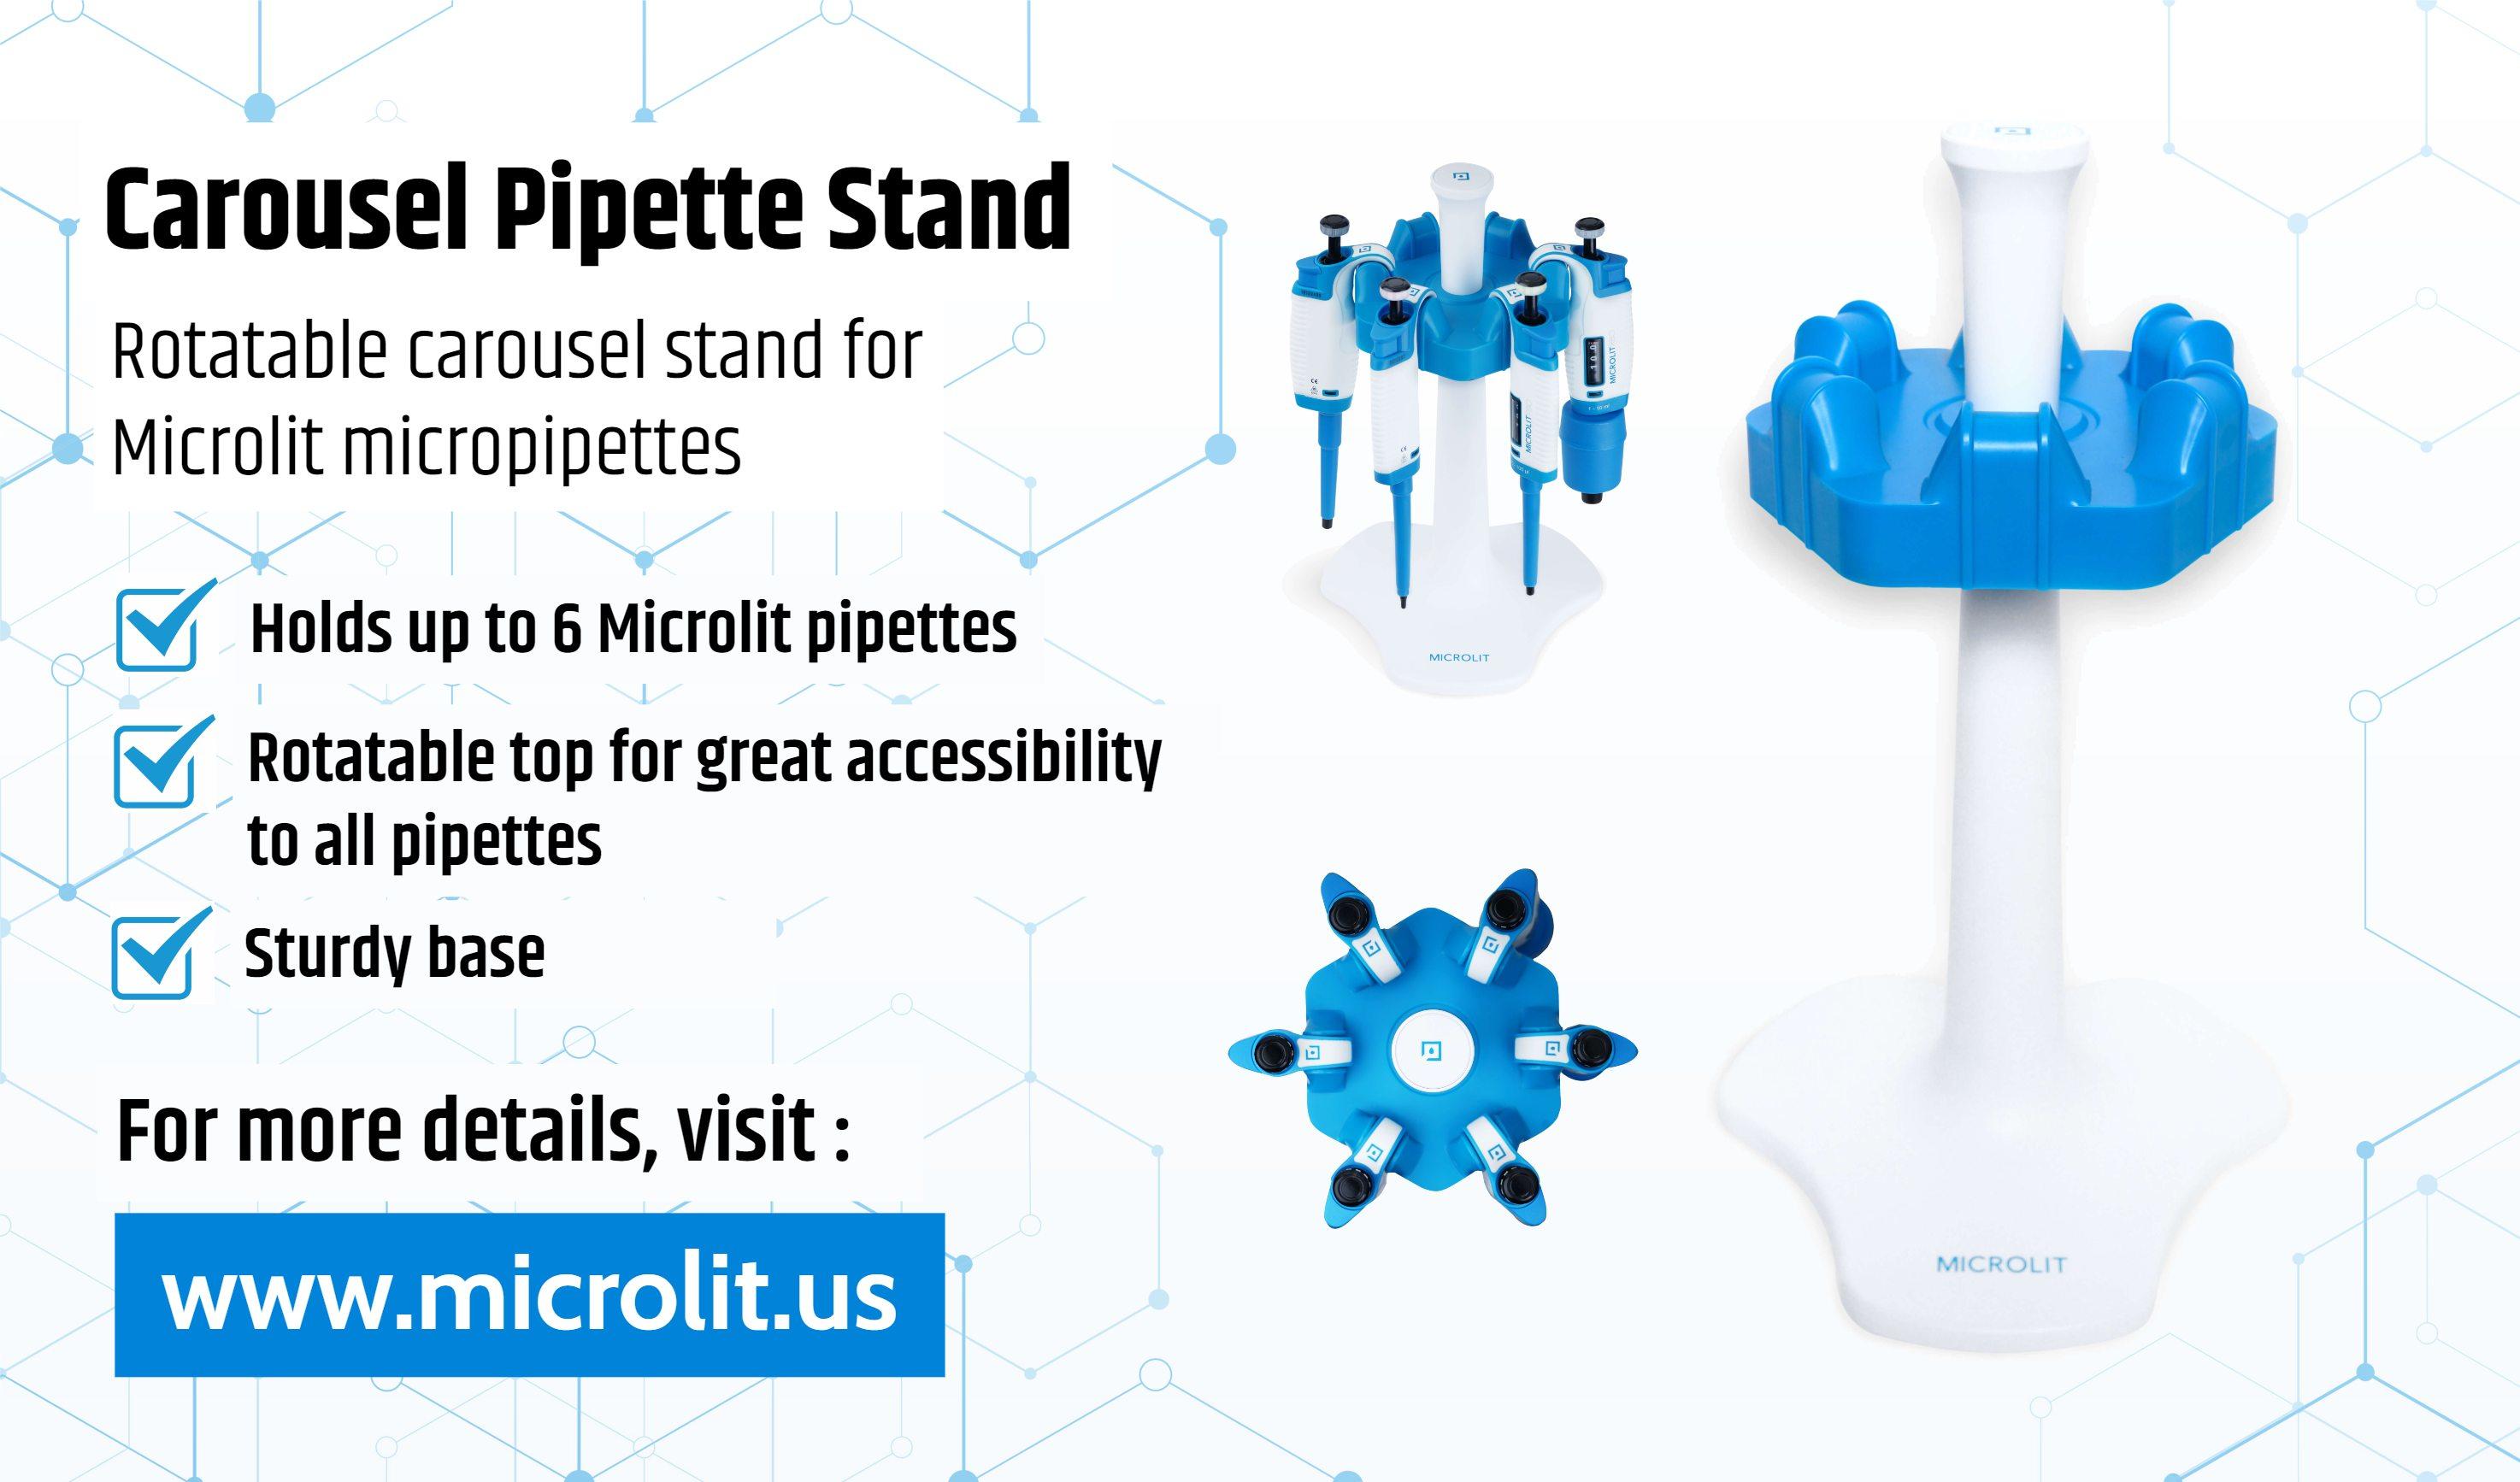 Image - Microlit offers the best quality carousel #PipetteStand that can holds up to 6 #micropipette easily. It has r...